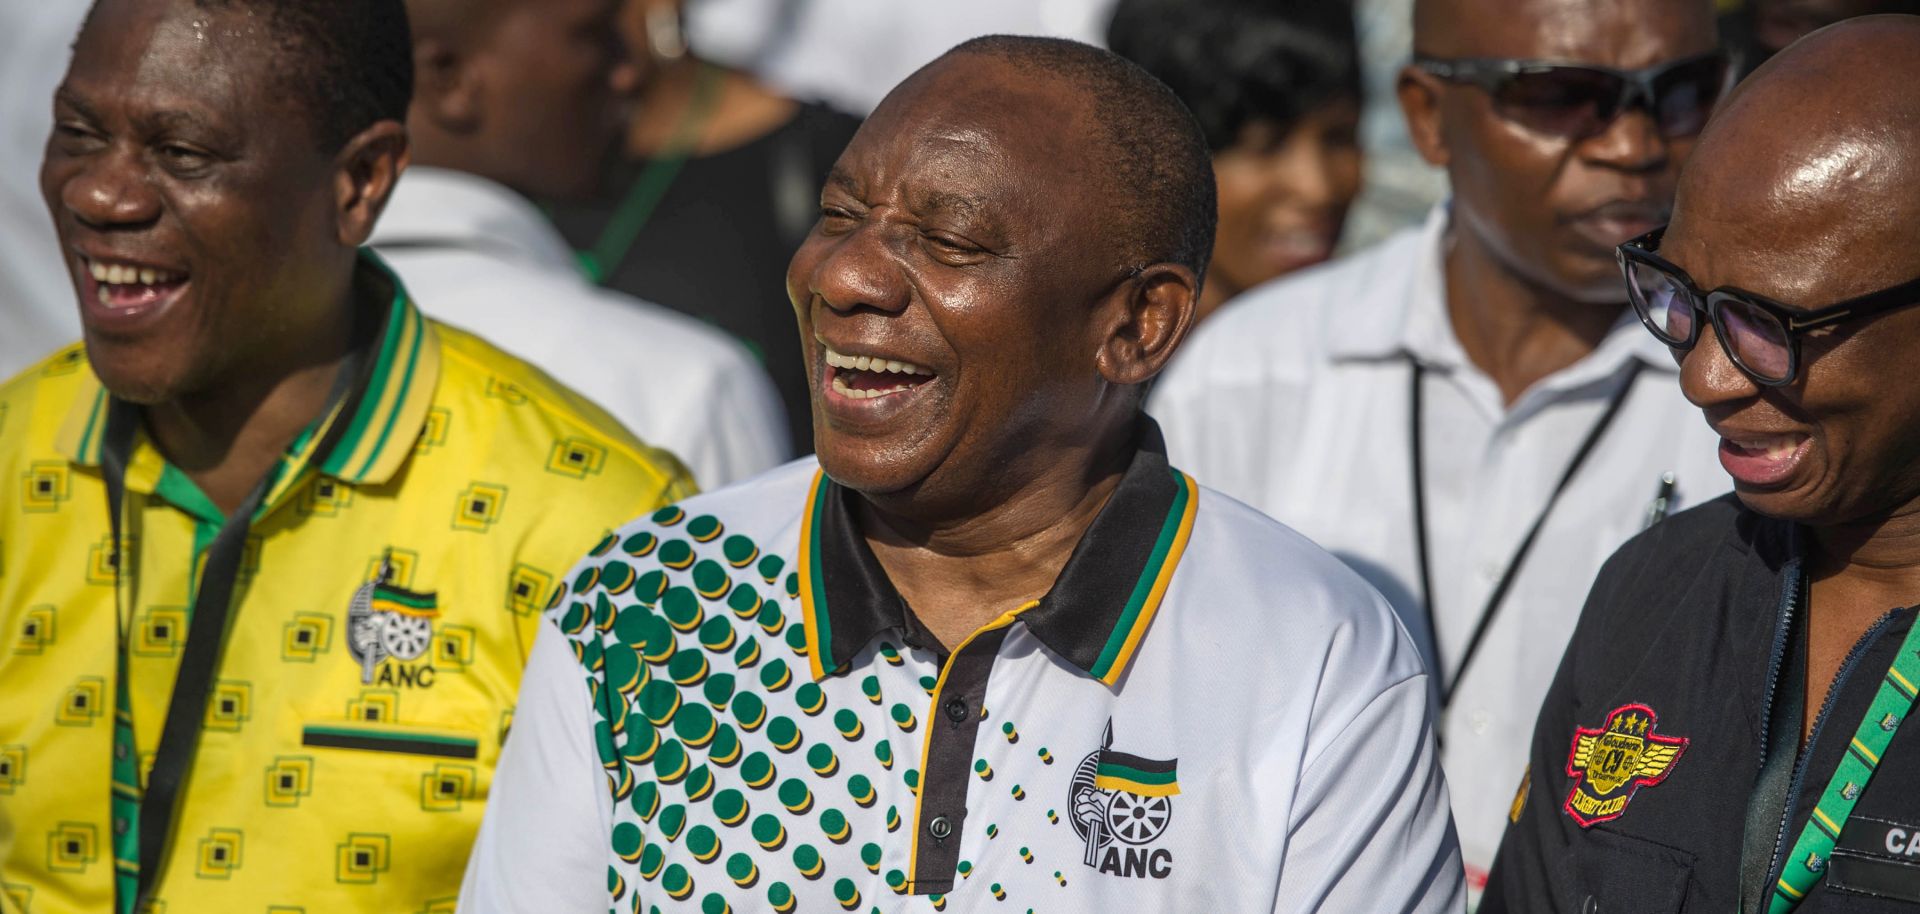 New ANC President Cyril Ramaphosa faces the difficult task of pushing pro-market policies to stimulate the economy while not alienating important factions he will need in 2019 elections.